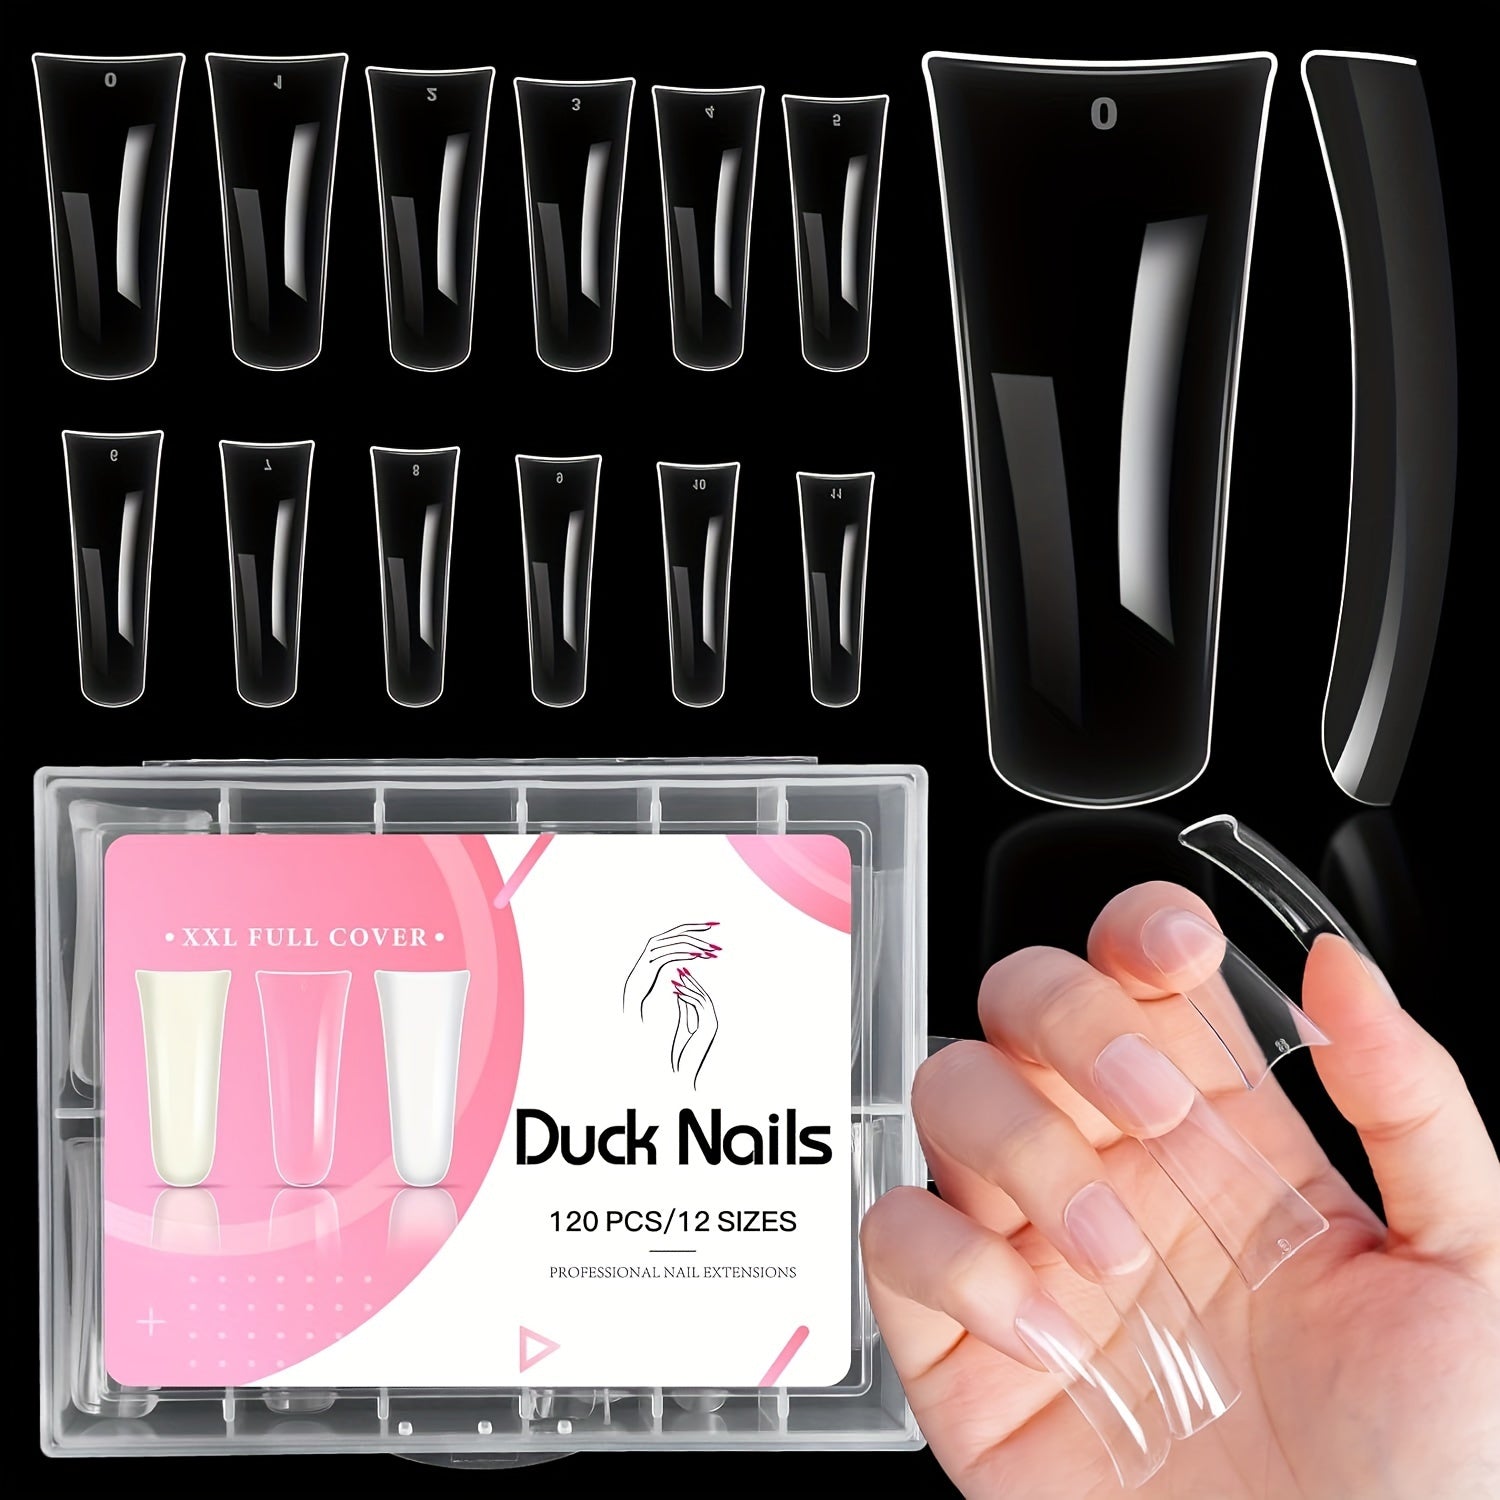 120pcs Shimmering Crystal Duck Nail Tips - 12 Sizes, Curved & Wide for Glamorous Acrylic Designs